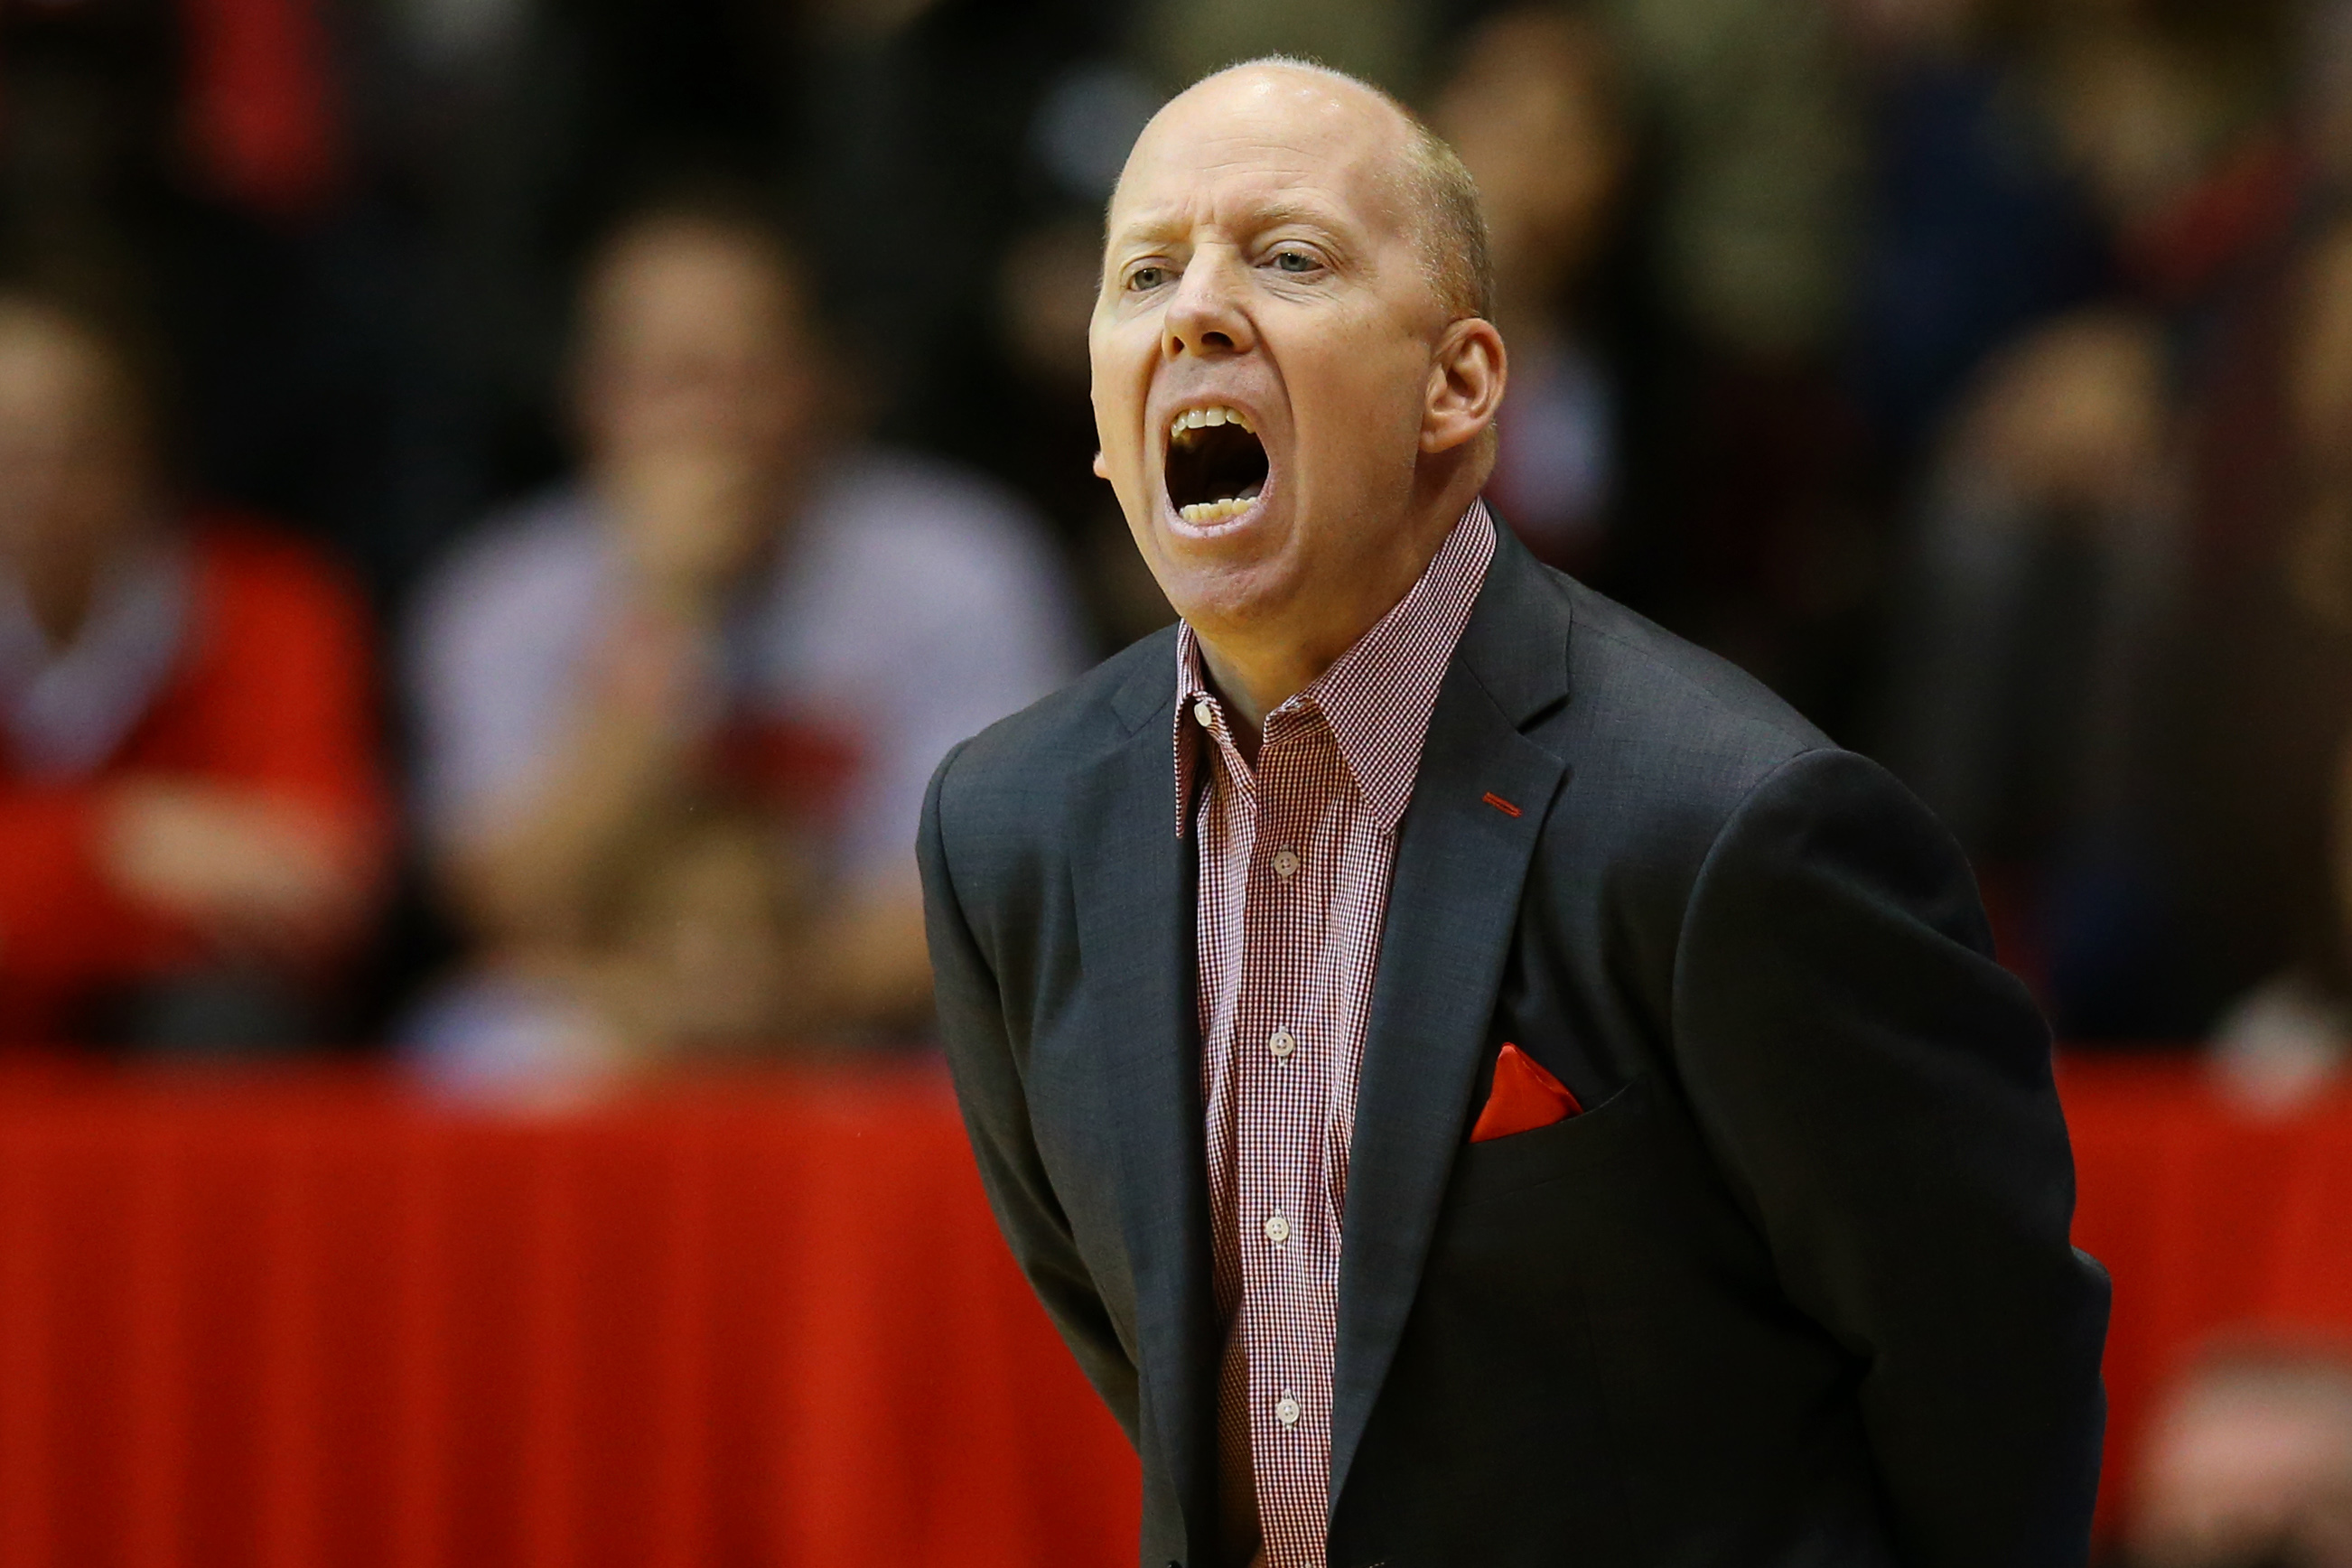 Nov 26, 2016; Cincinnati, OH, USA; Cincinnati Bearcats head coach Mick Cronin reacts from the bench against the Lipscomb Bisons in the first half at Fifth Third Arena. Mandatory Credit: Aaron Doster-USA TODAY Sports